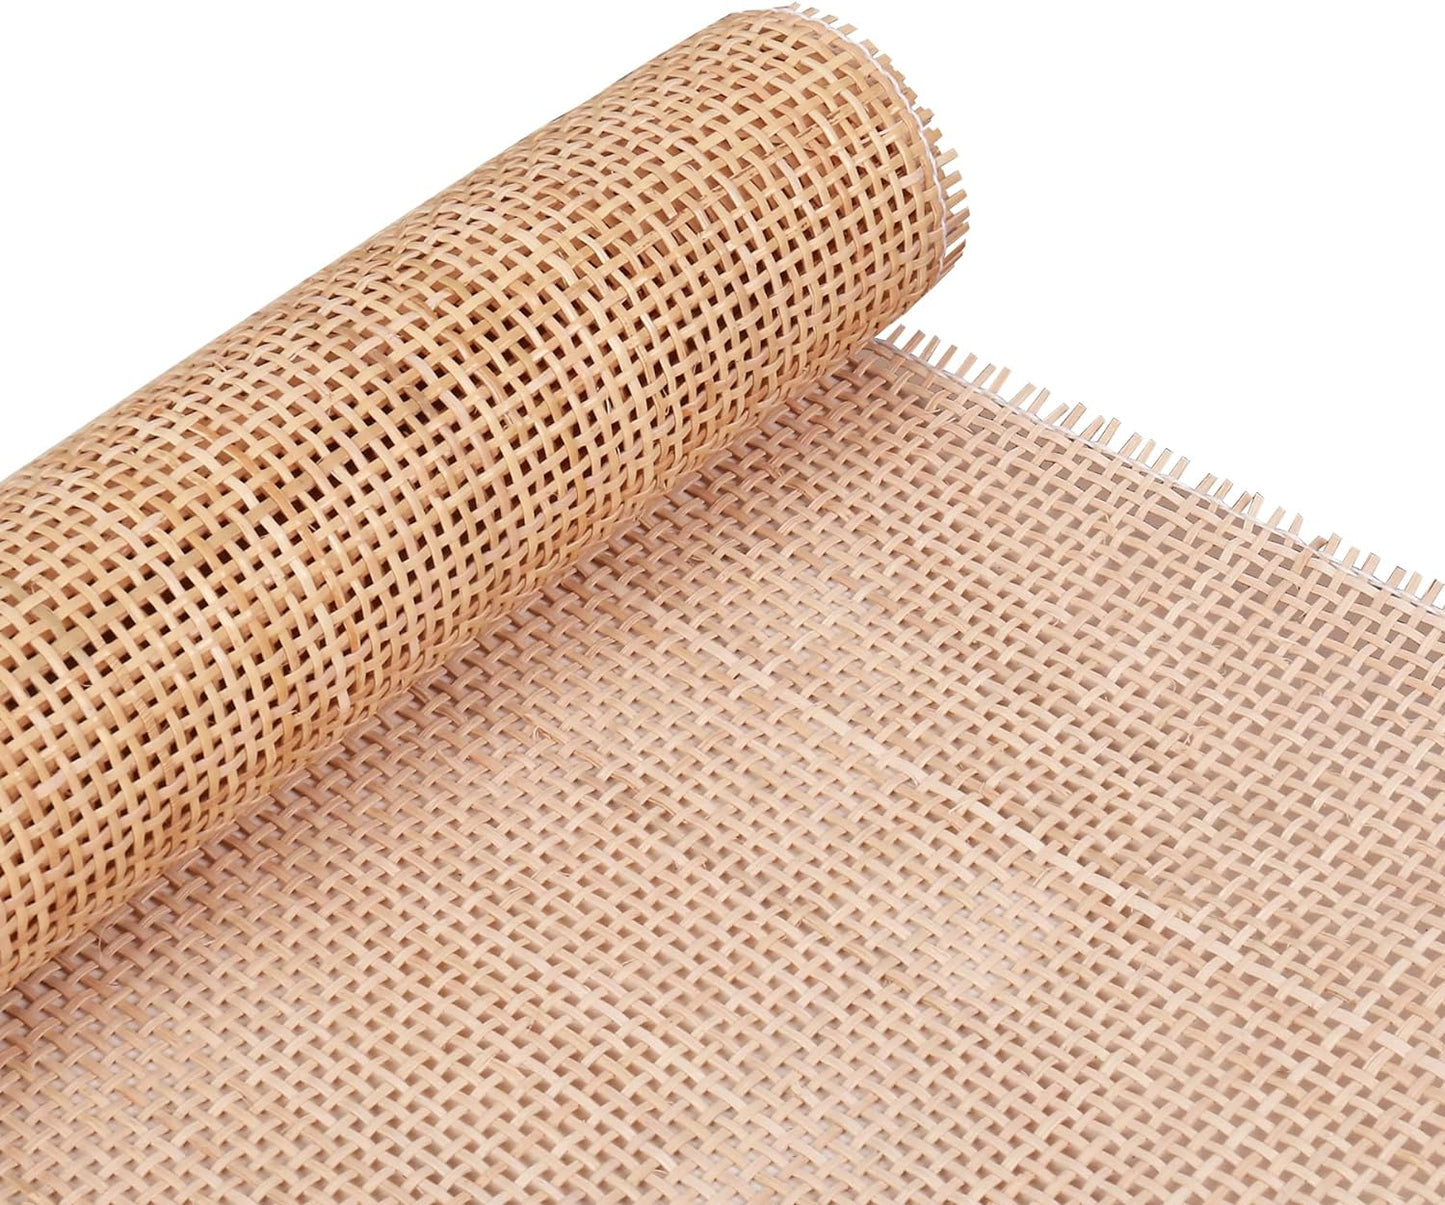 24" Width Natural Square Cane Webbing 5Feet, Rattan Webbing Roll for Caning Projects, Woven Open Mesh Cane for Furniture, Chair, Cabinet, Ceiling, Bed